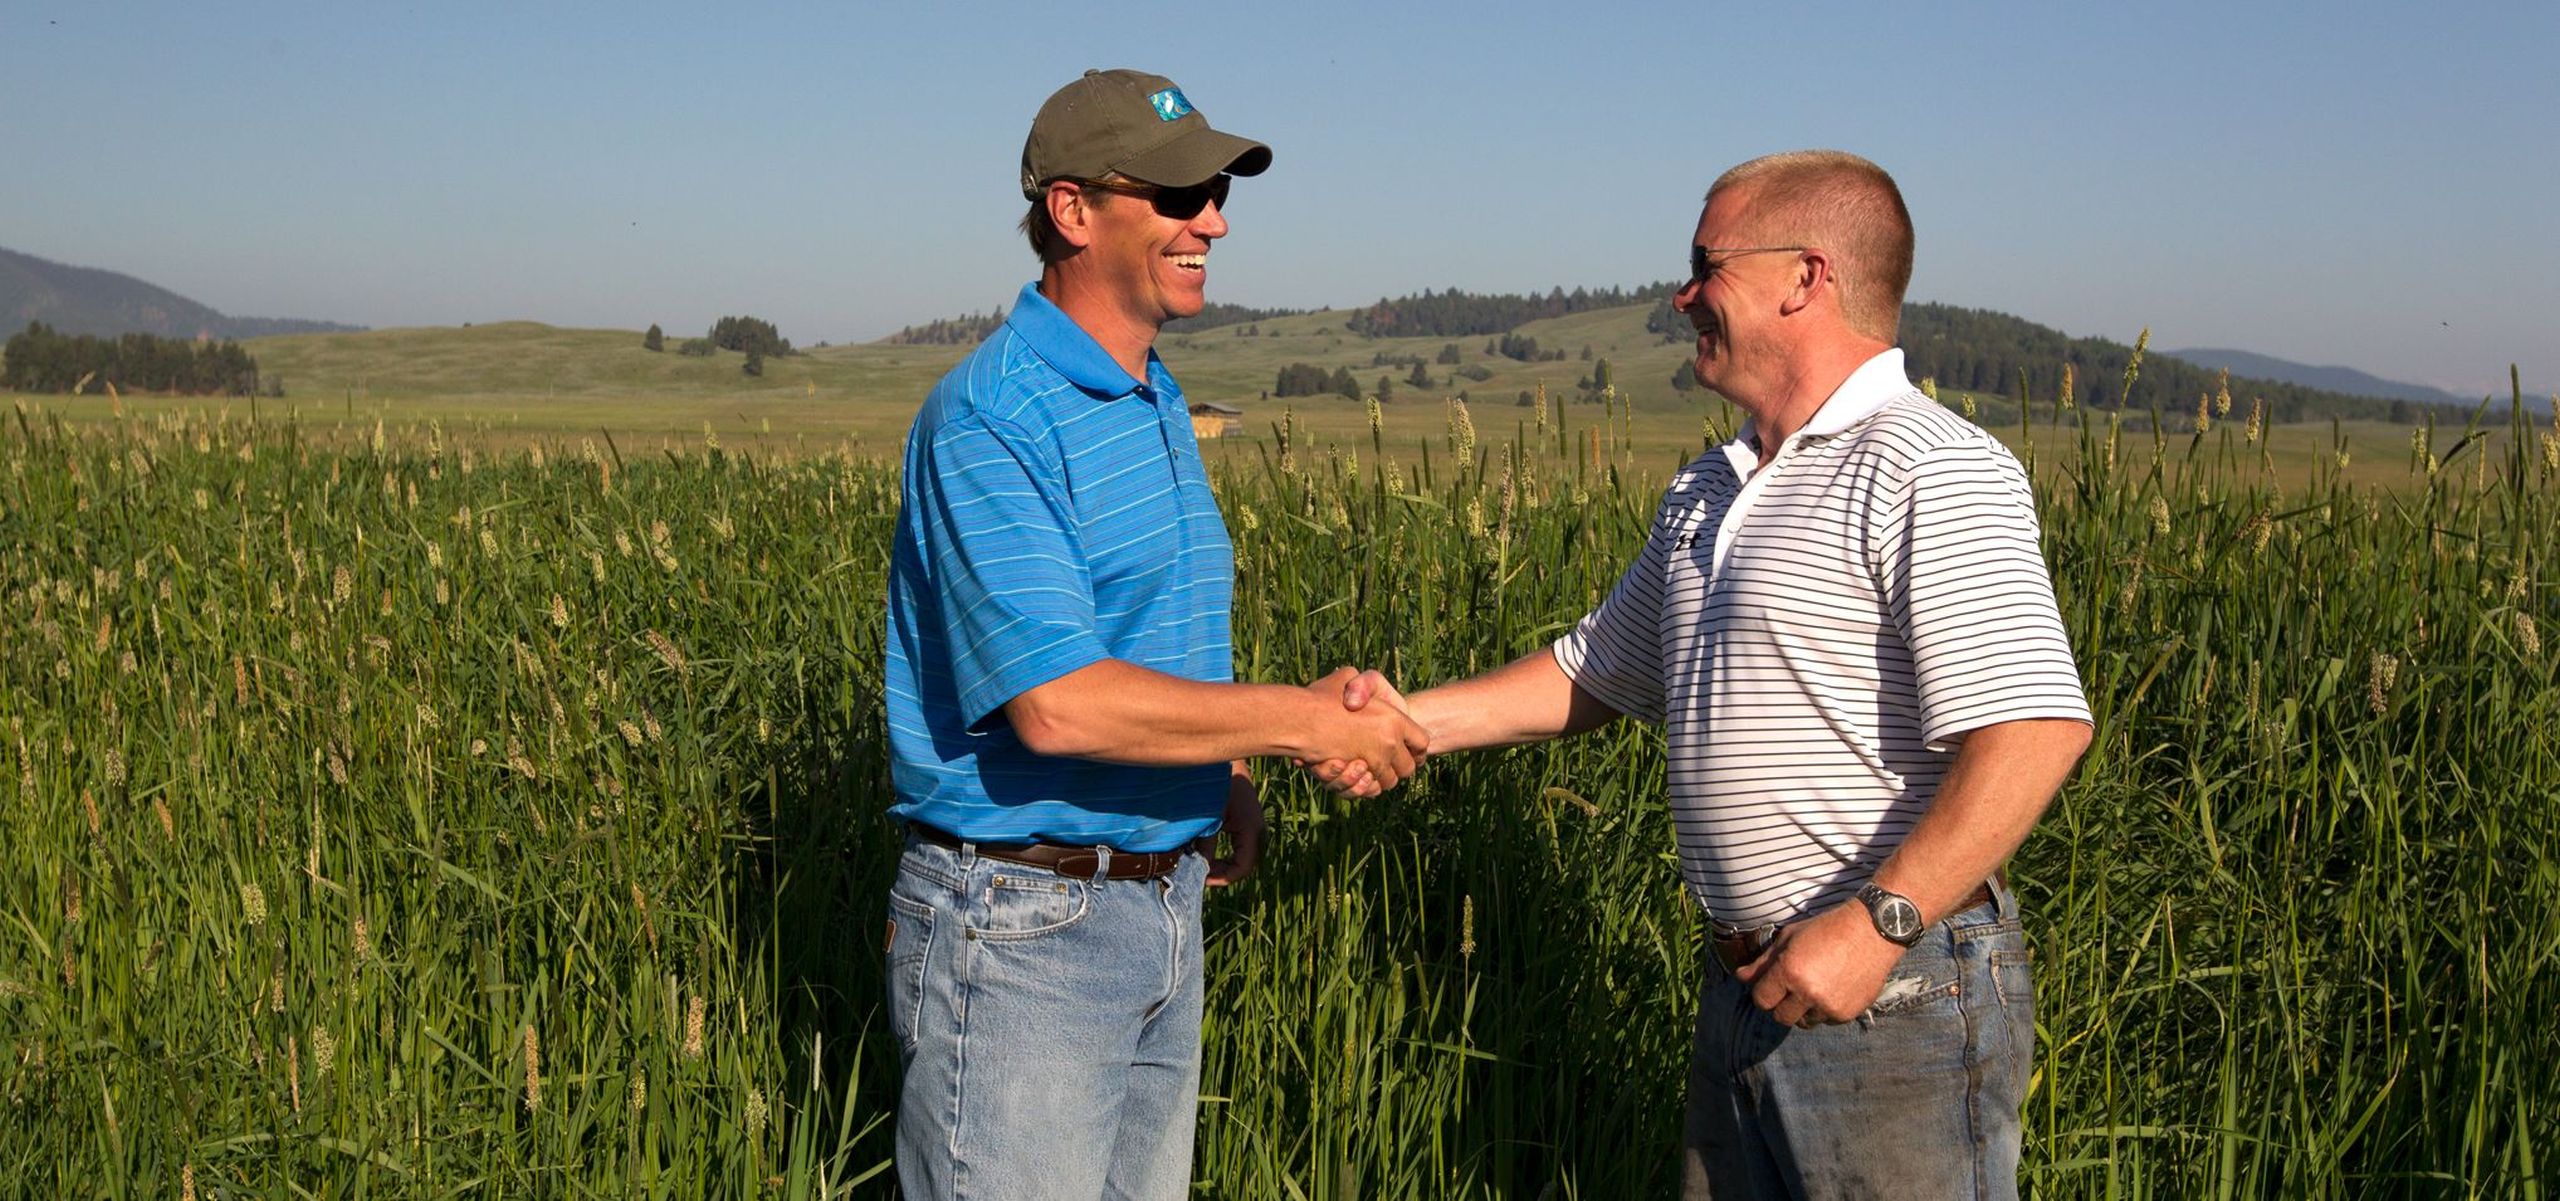 Two smiling men standing in a field of tall grass shake hands.